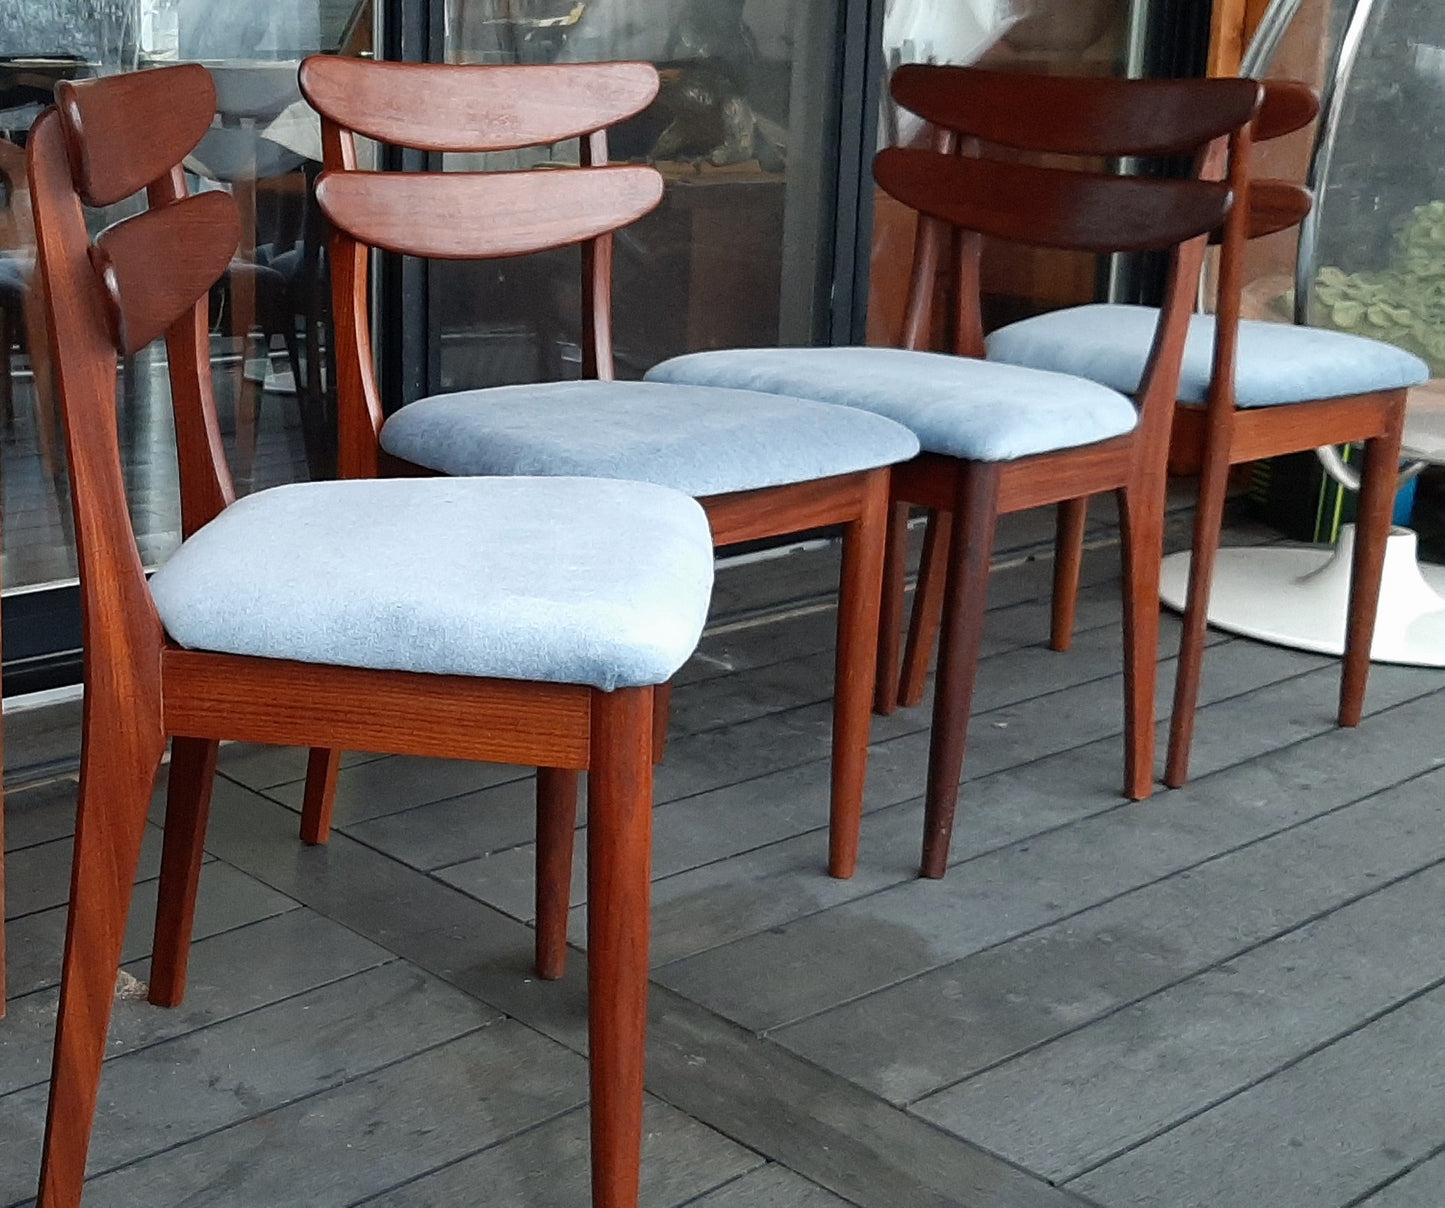 4 REFINISHED Danish MCM teak chairs, REUPHOLSTERED in wool mohair, PERFECT